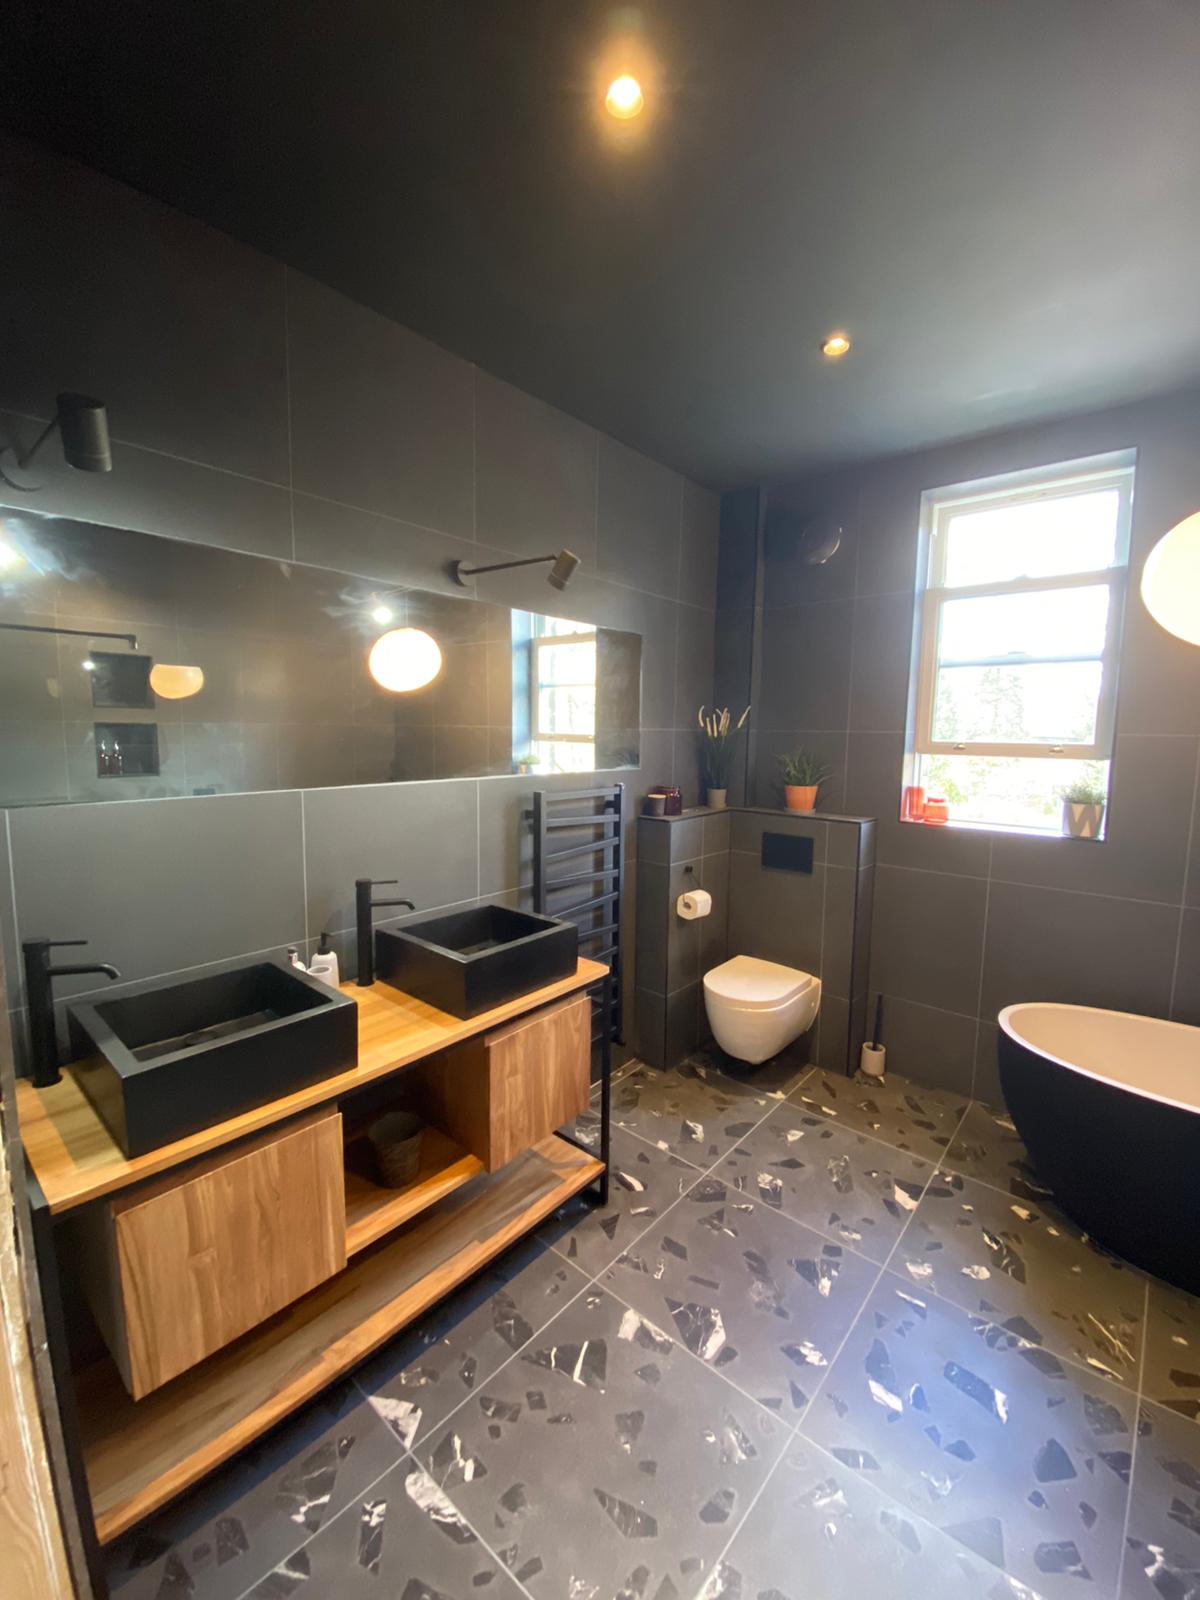 bedroom to bathroom conversion making use of a larger space to create your perfect bbathroom